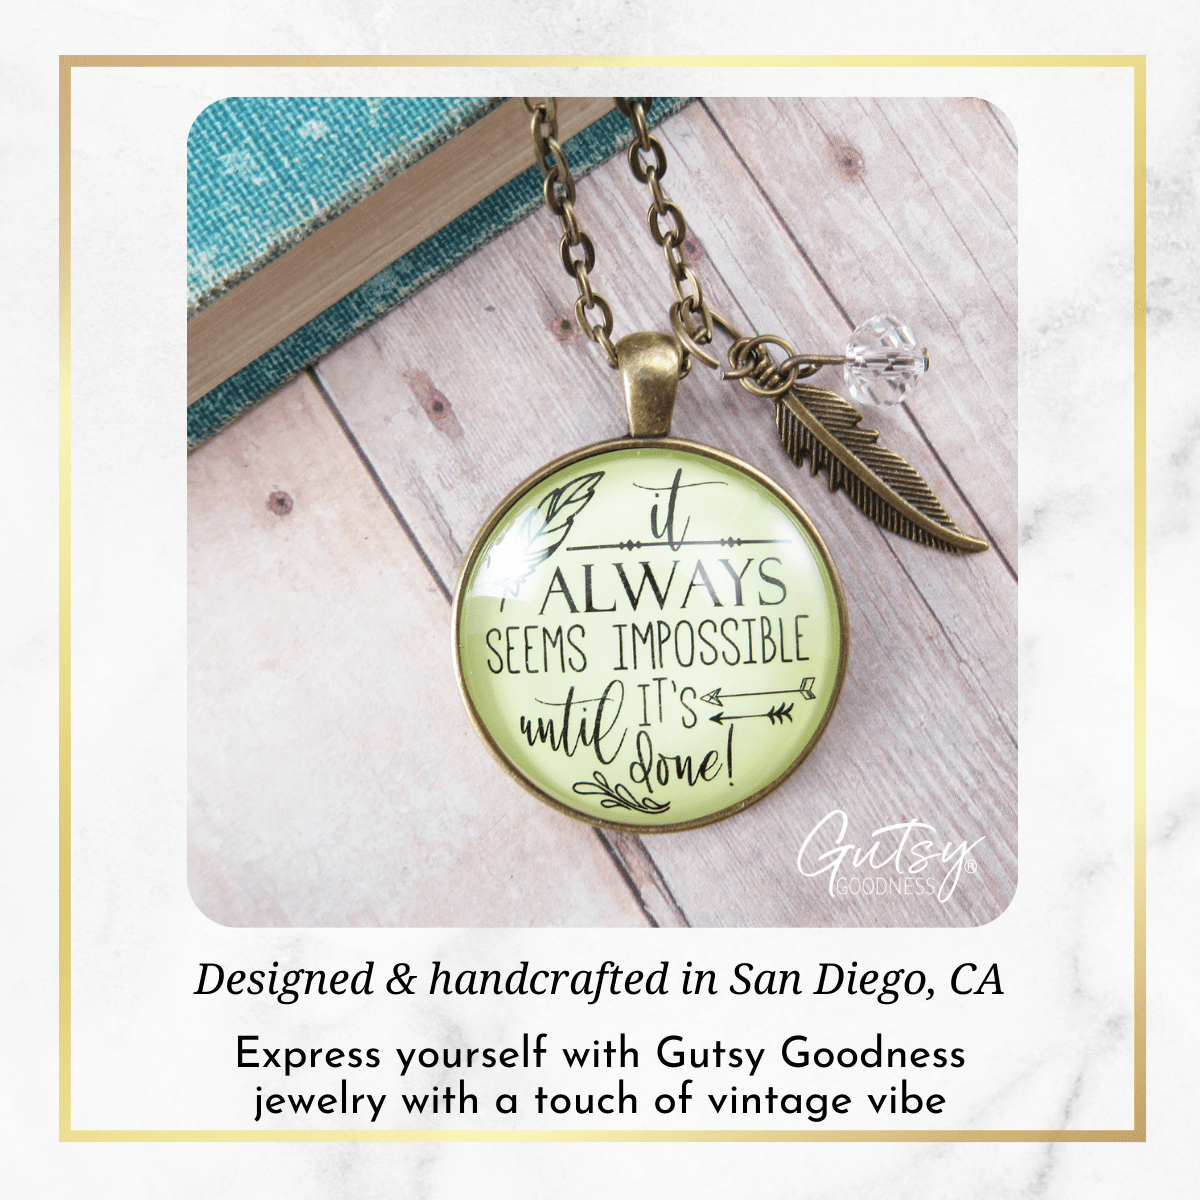 Gutsy Goodness Mantra Necklace It Always Seems Impossible Until It's Done - Gutsy Goodness Handmade Jewelry;Mantra Necklace It Always Seems Impossible Until It's Done - Gutsy Goodness Handmade Jewelry Gifts